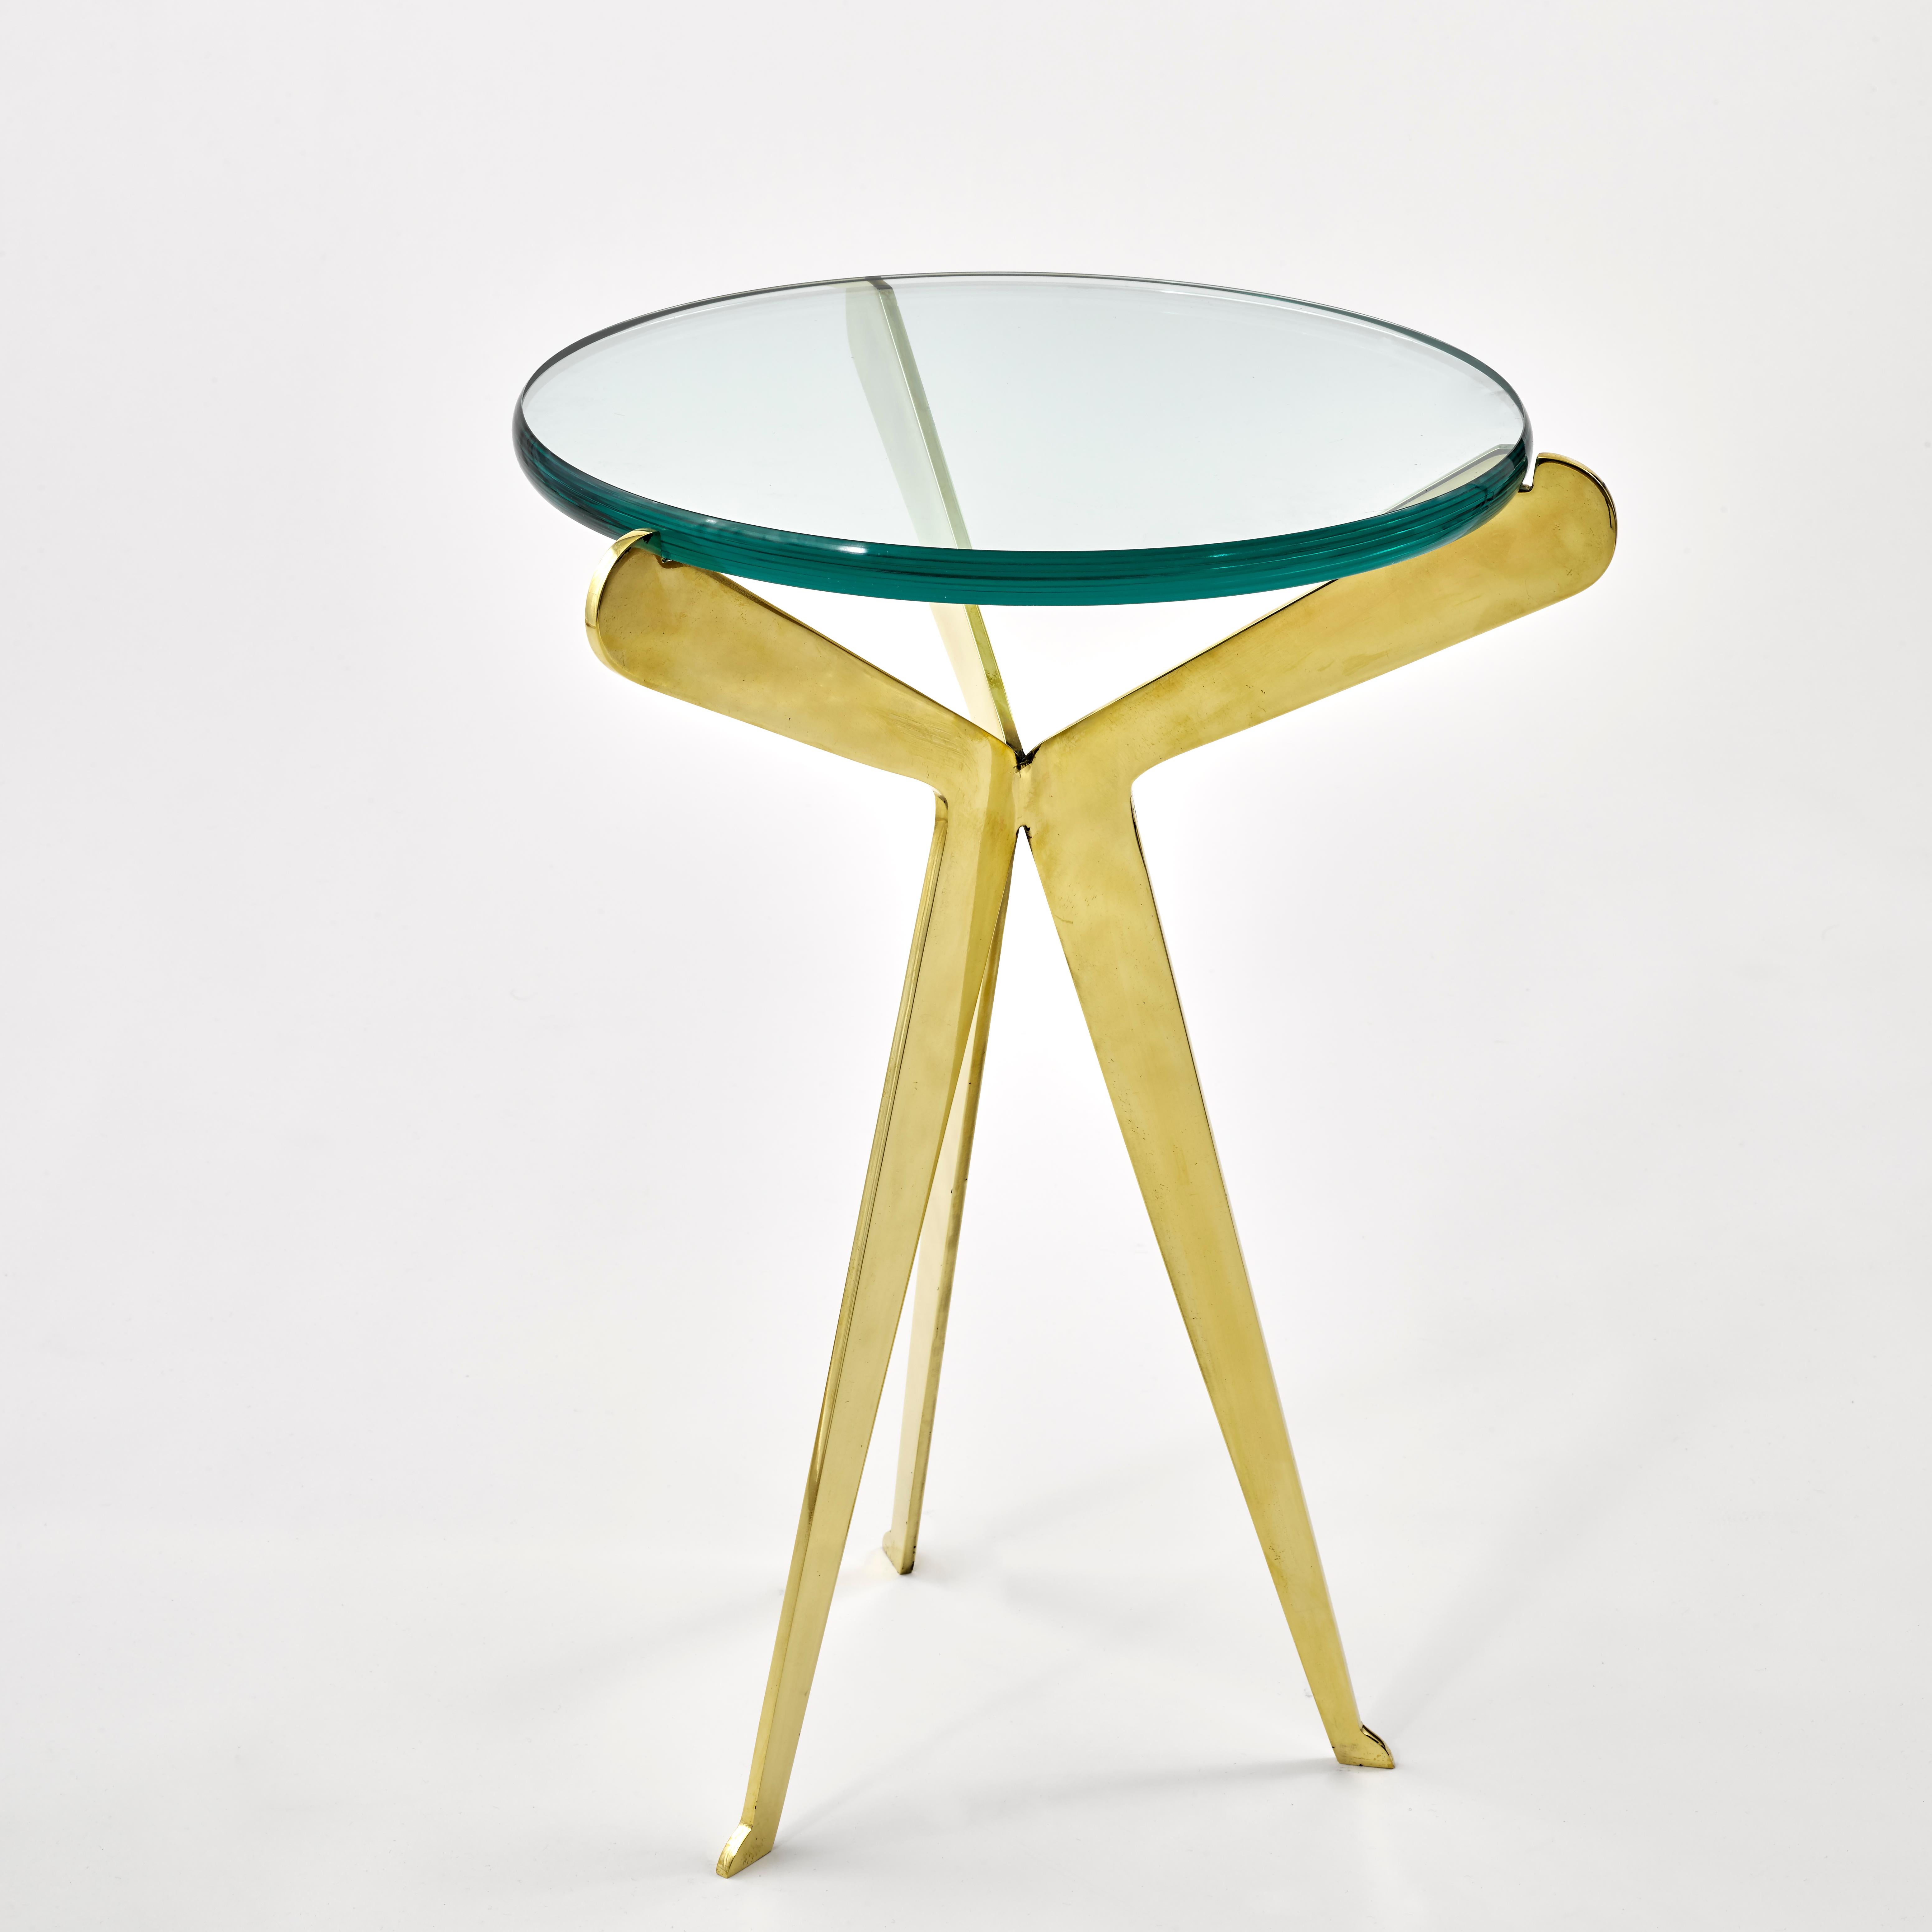  The Fiore table features three brass legs coming together at a central weld and then sprouting to hold a thick glass top. Shown in polished brass.

Customization Options: 

Each piece is hand crafted in Italy and is available in any of our 10